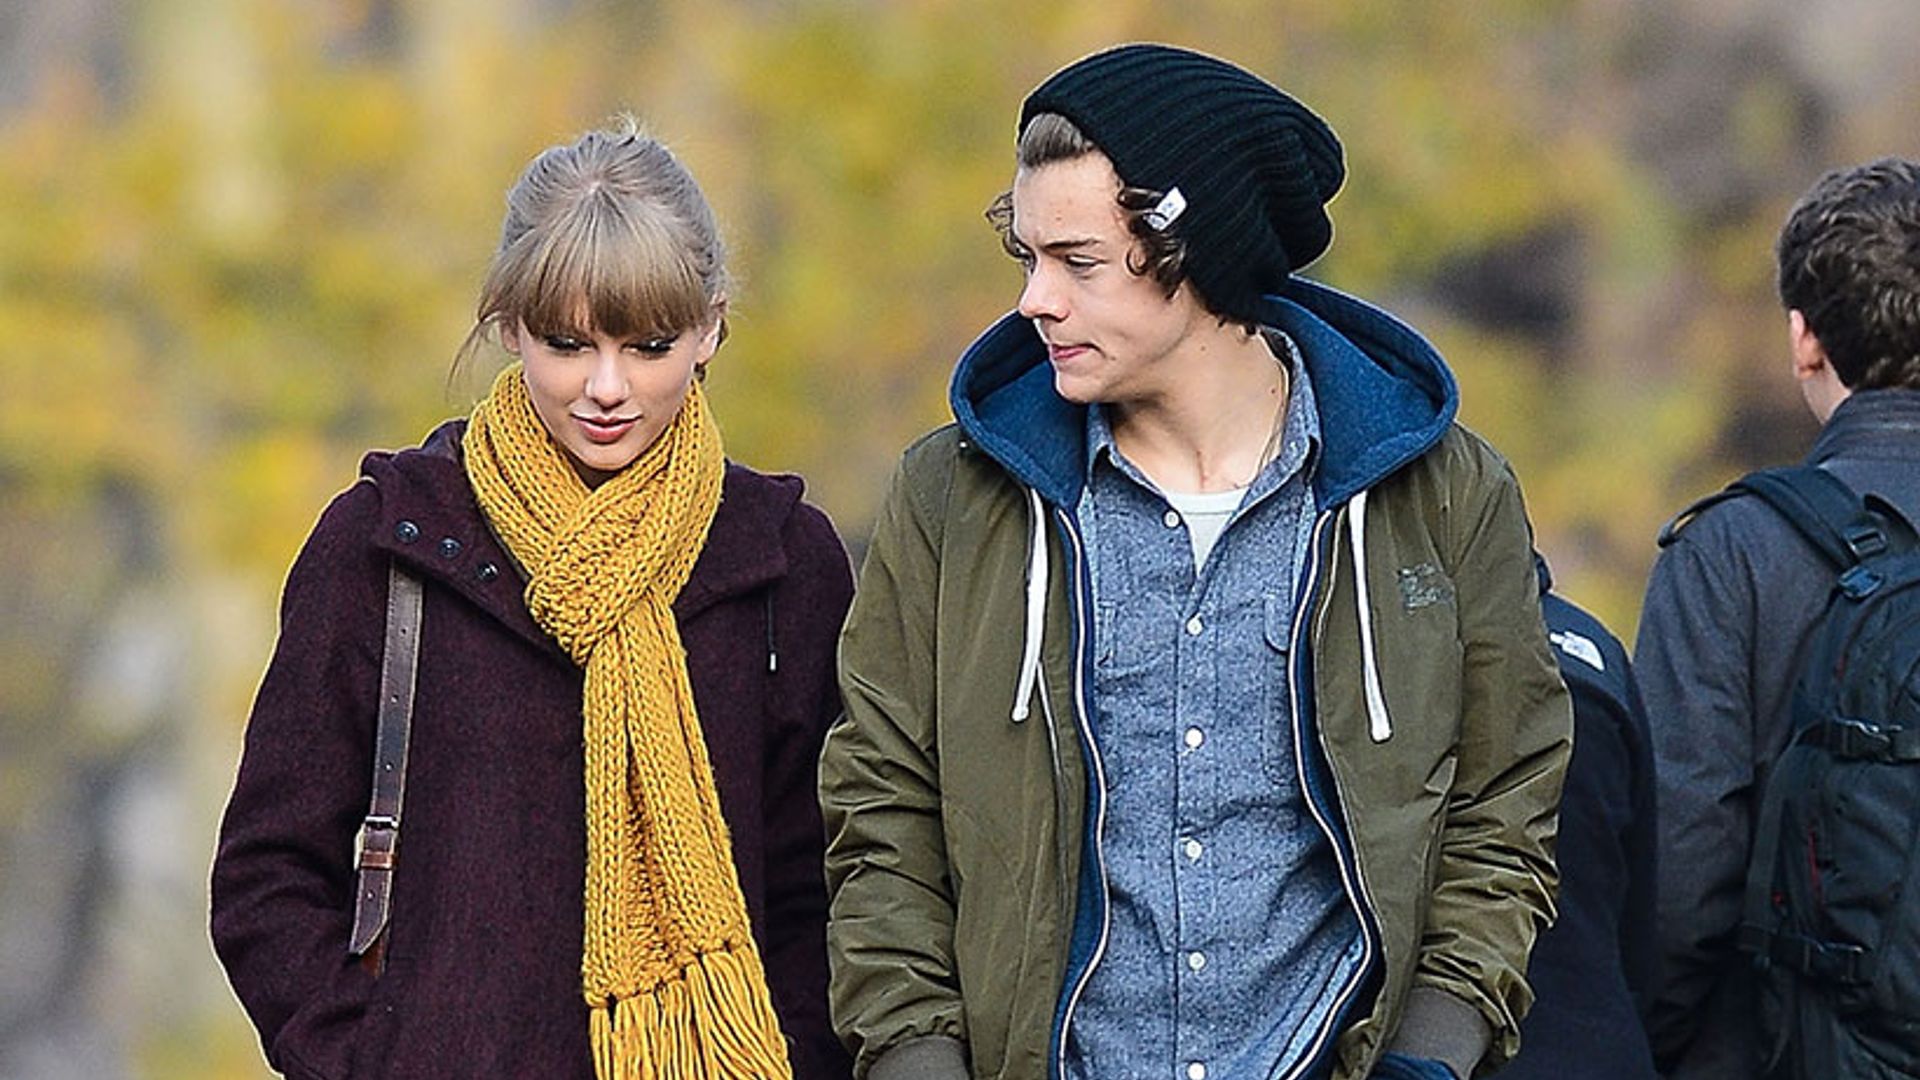 Harry Styles speaks candidly about Taylor Swift romance